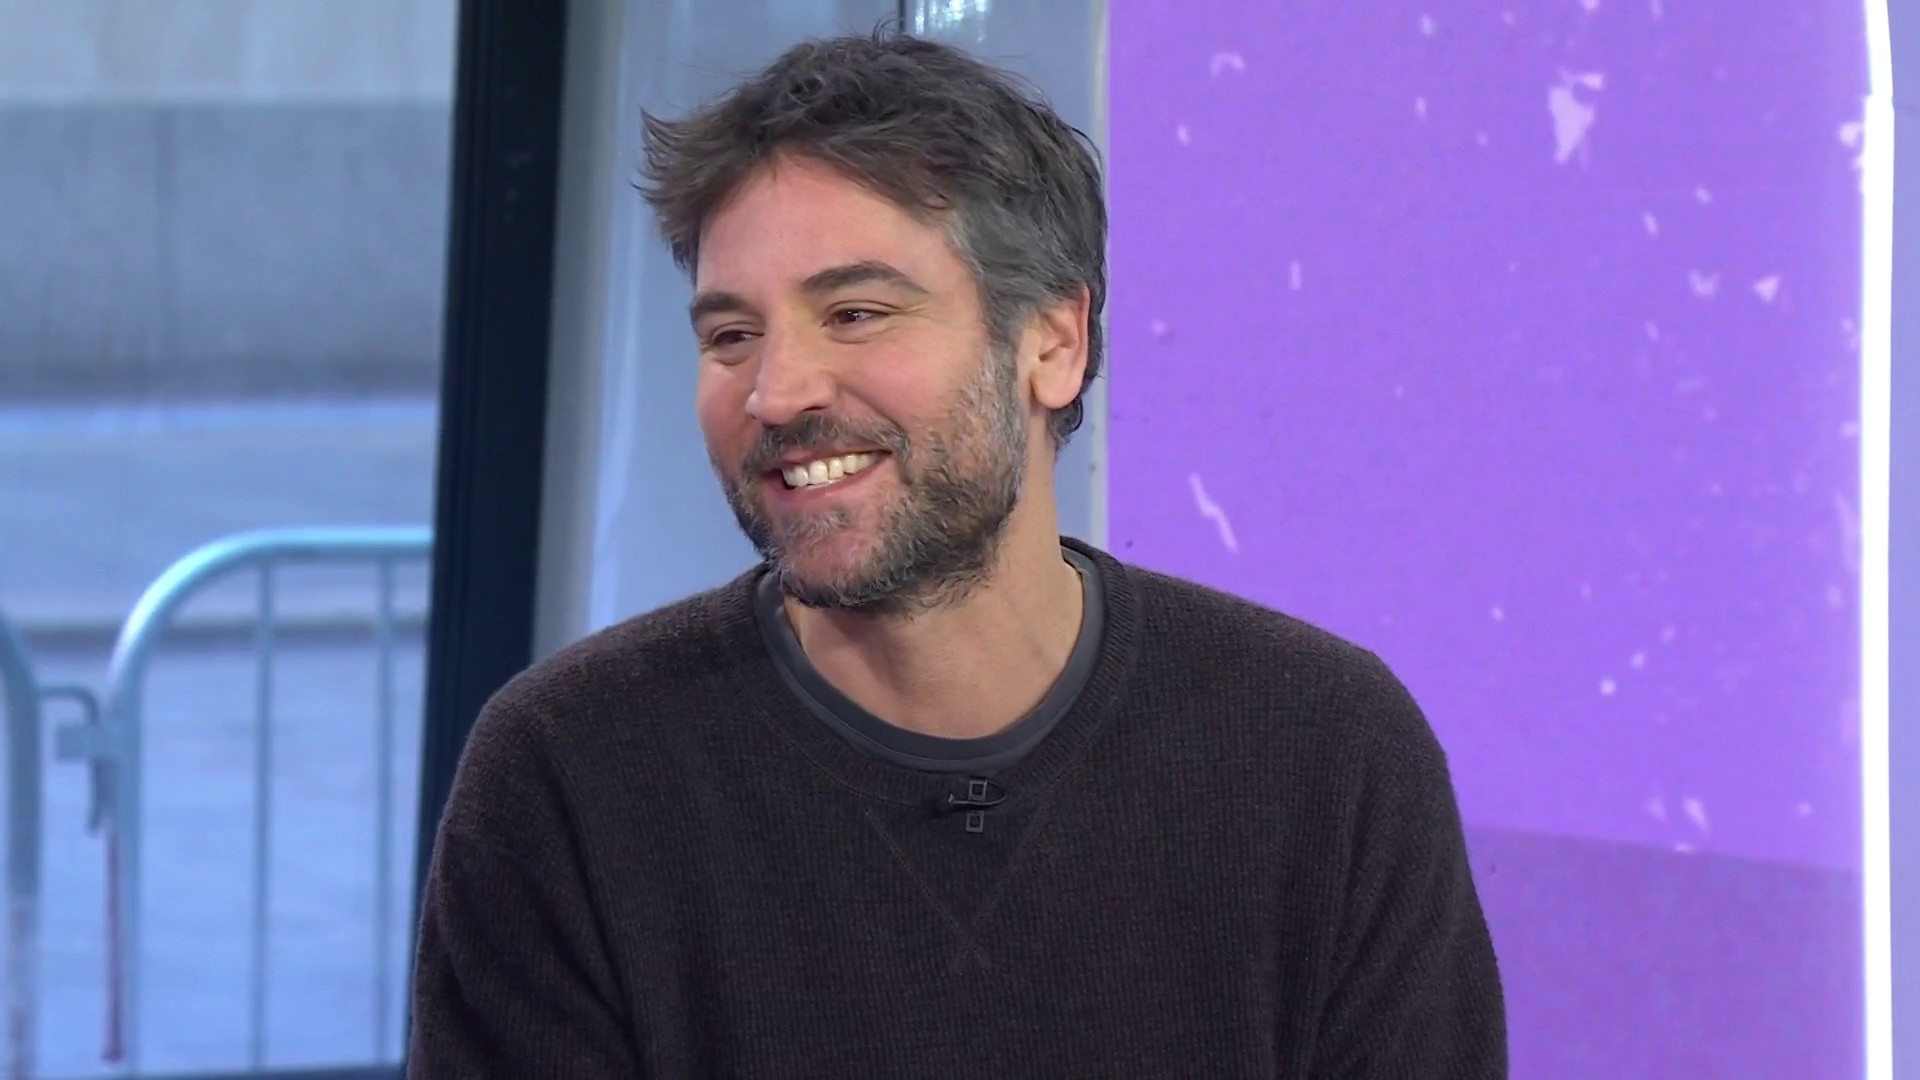 Josh Radnor talks about his latest role that's taking him to the stage